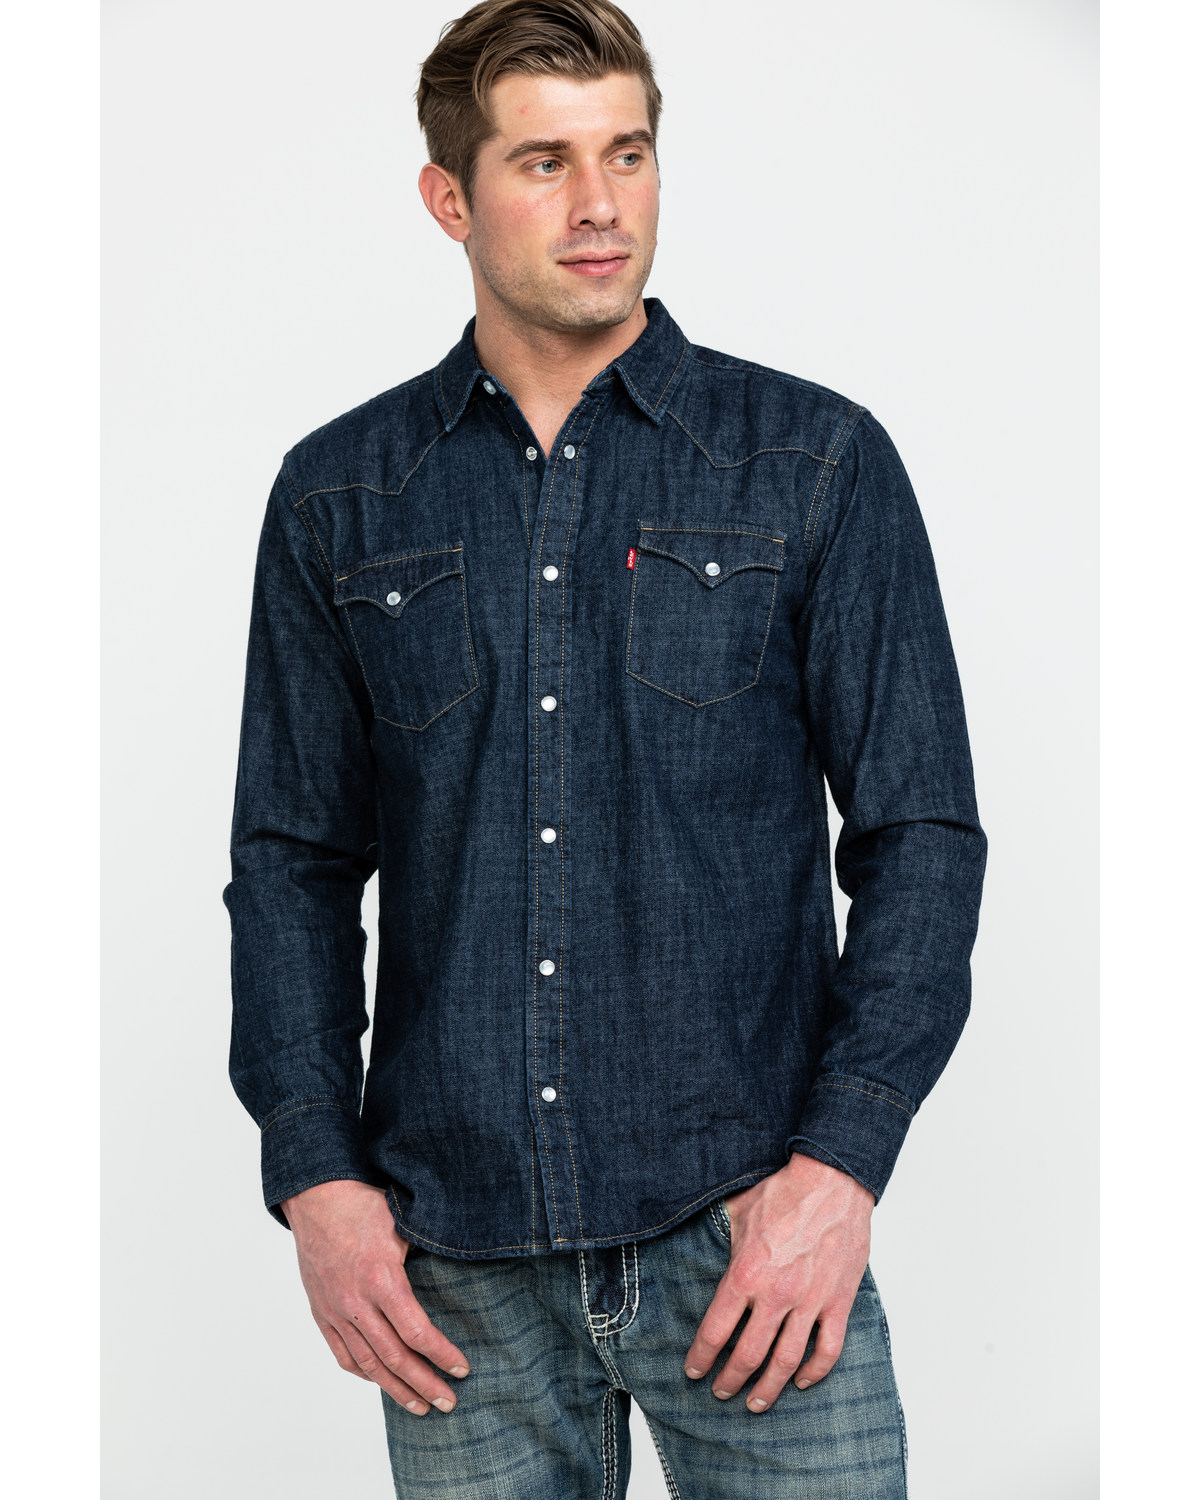 levi's jeans and shirt